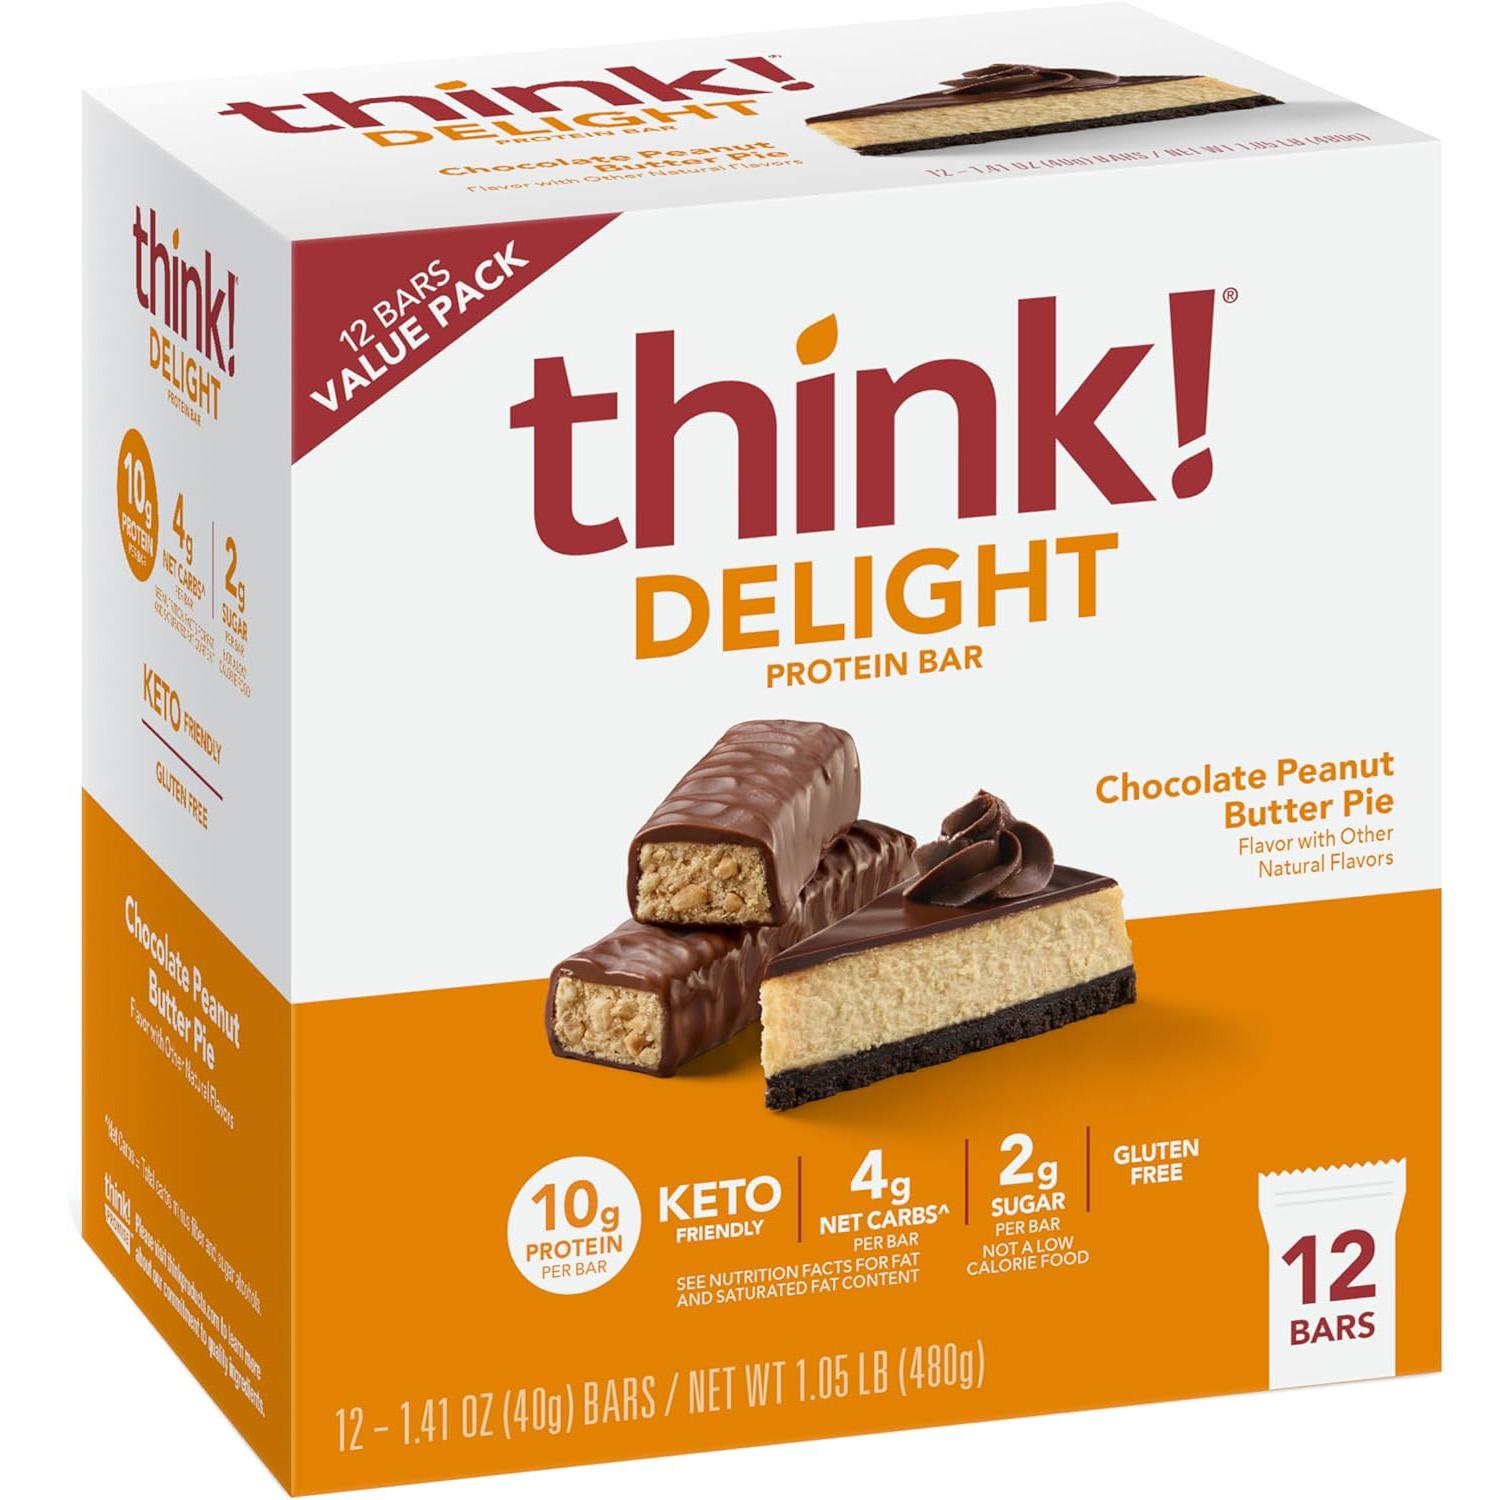 think Delight Keto Protein Bars Chocolate Peanut Butter Pie 12 Pack for $11.95